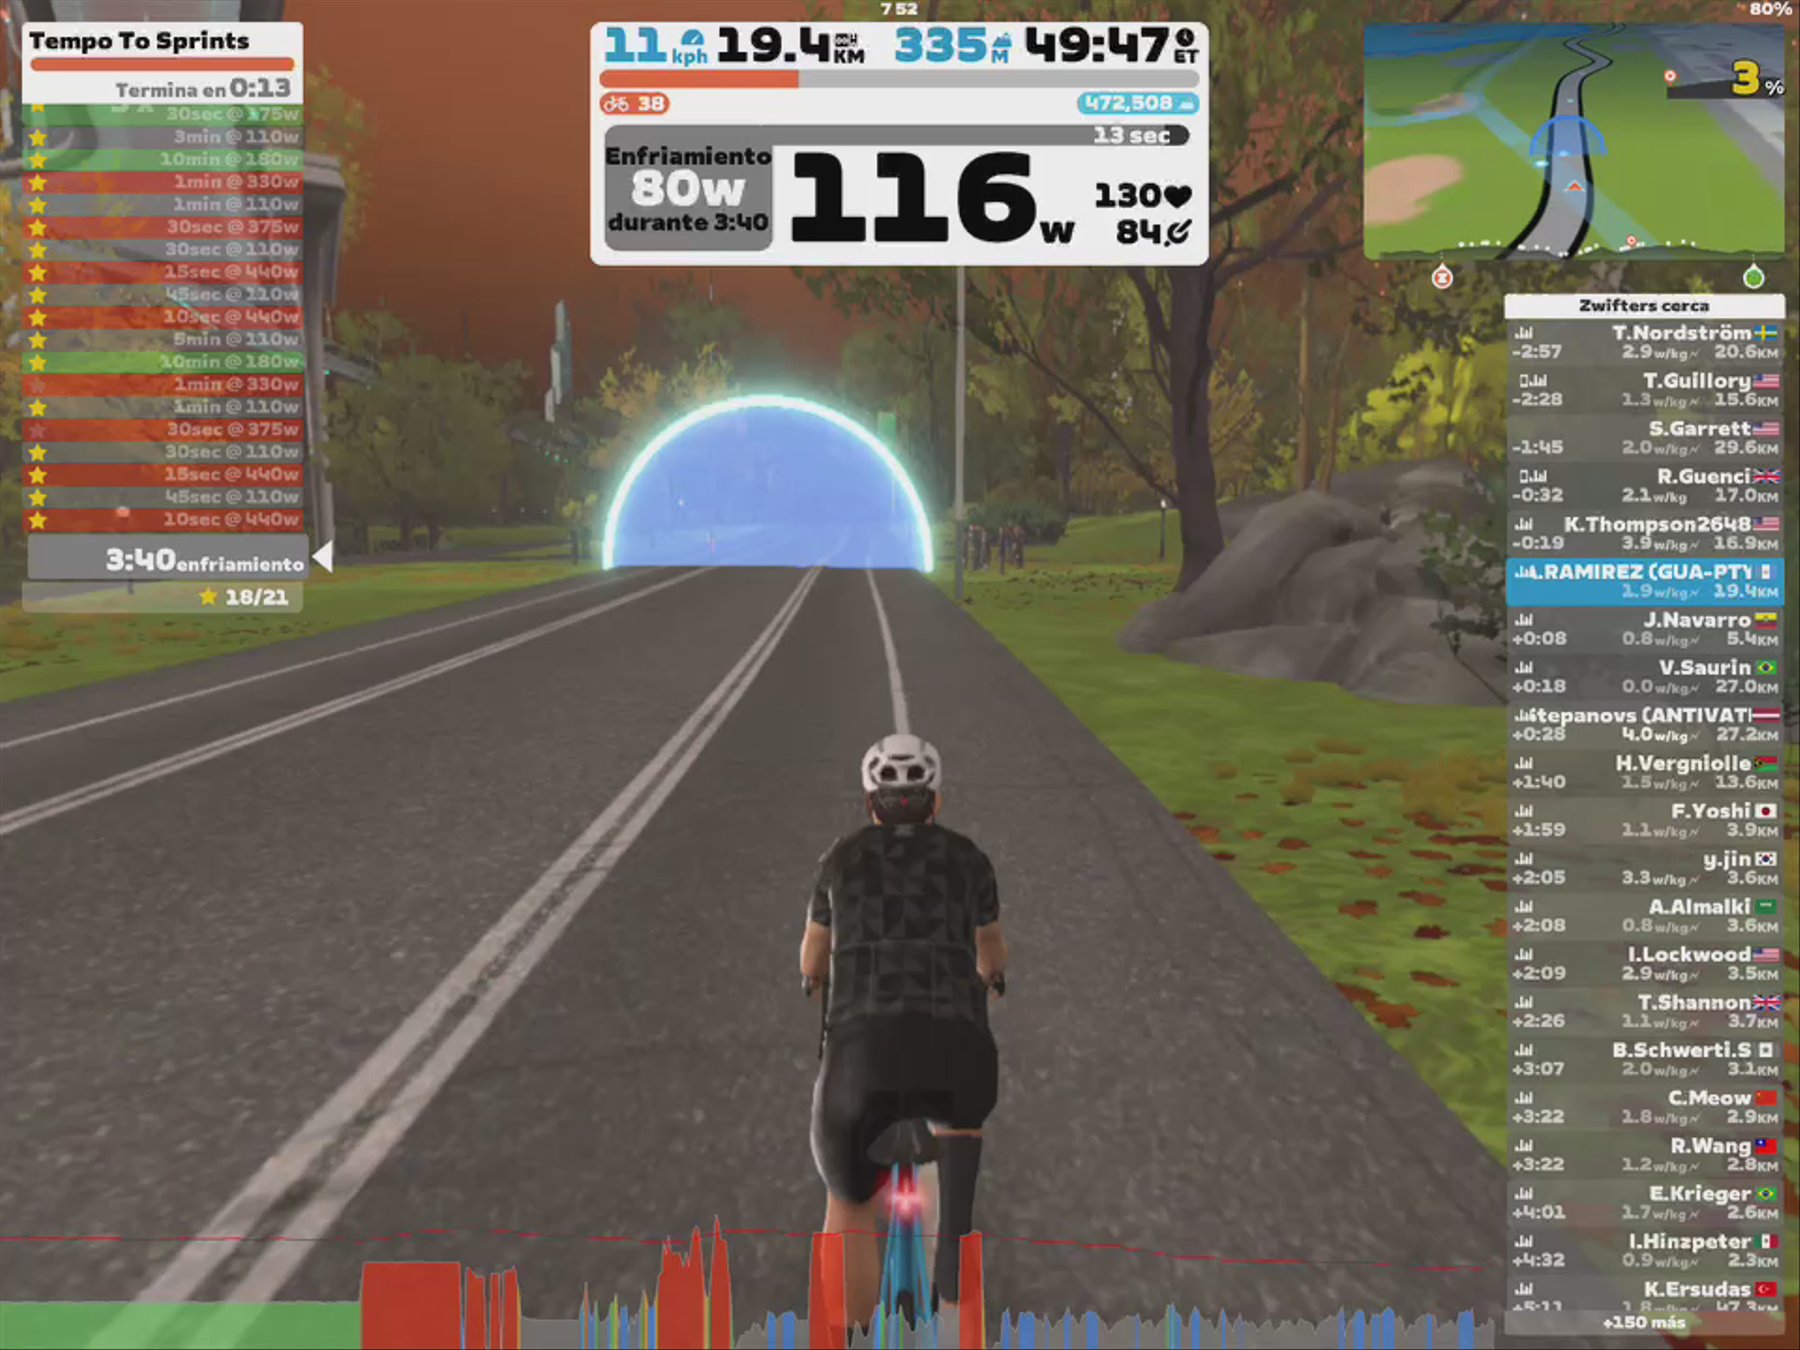 Zwift - Tempo To Sprints in New York